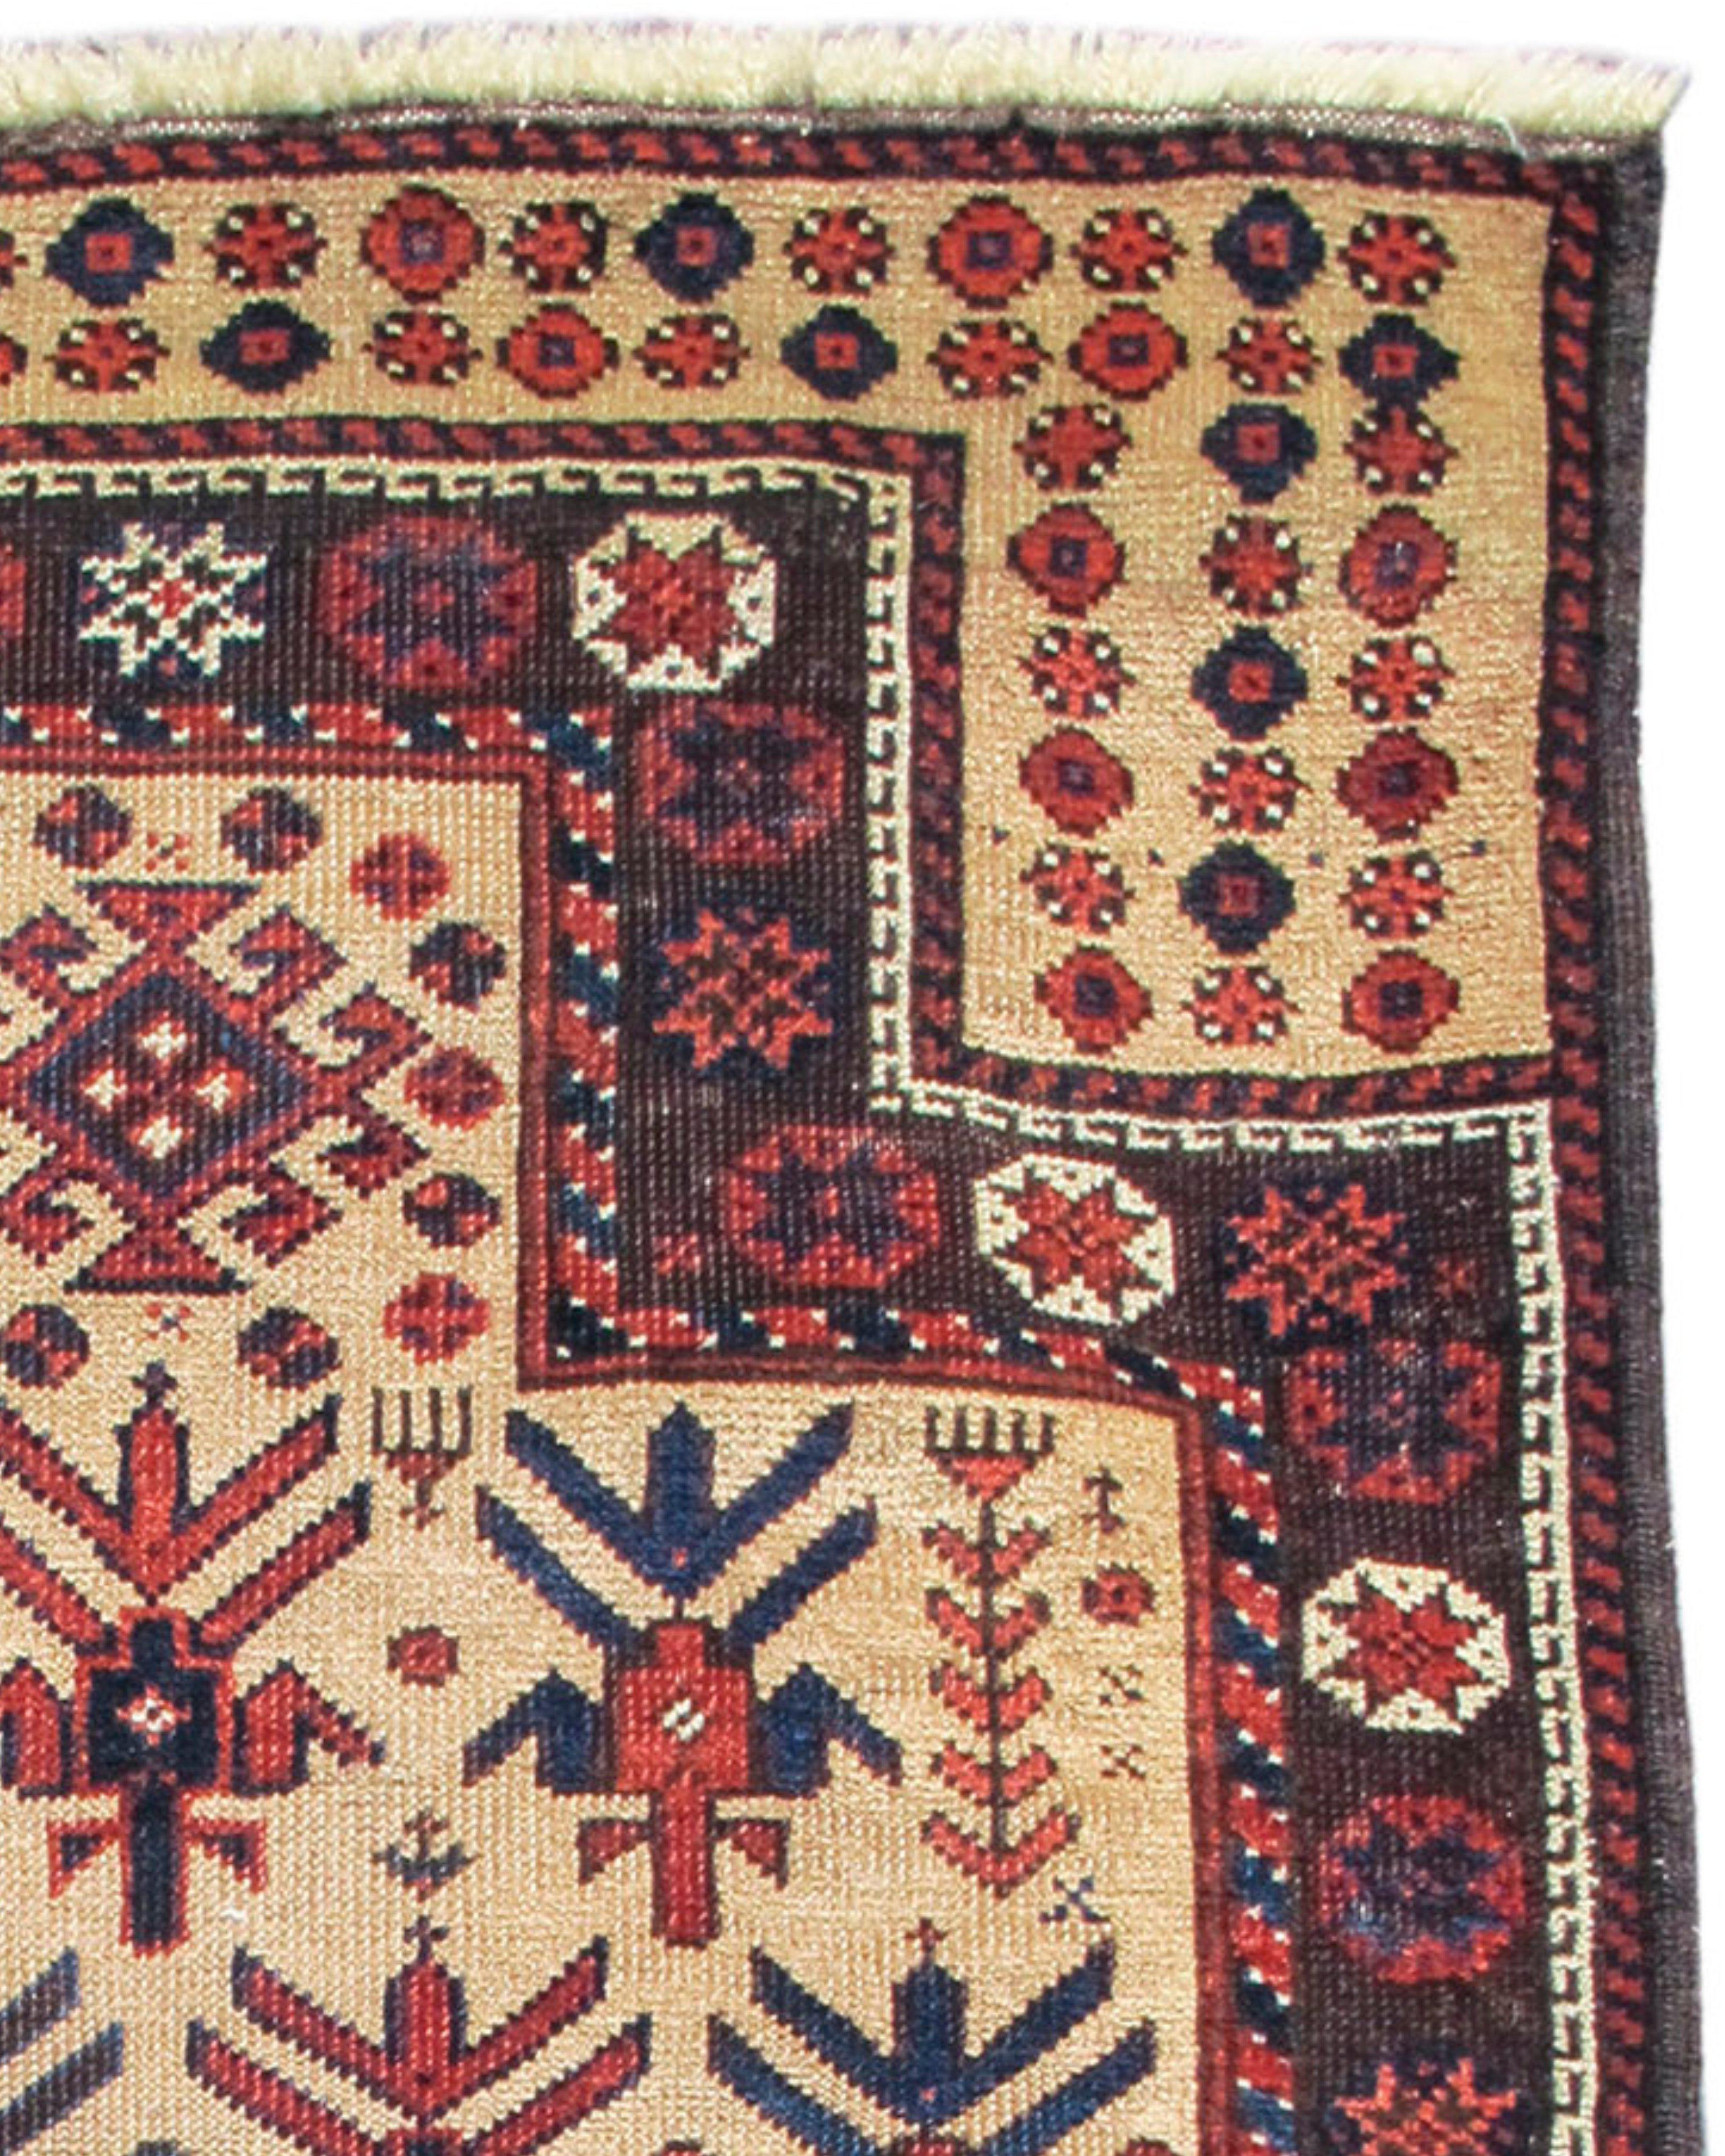 Antique Persian Baluch Prayer Rug, Late 19th Century

Camel hair field. Oxidation in browns, and reds, with the majority of the indigo and camel hair being original pile height.

Additional Information:
Dimensions: 2'3